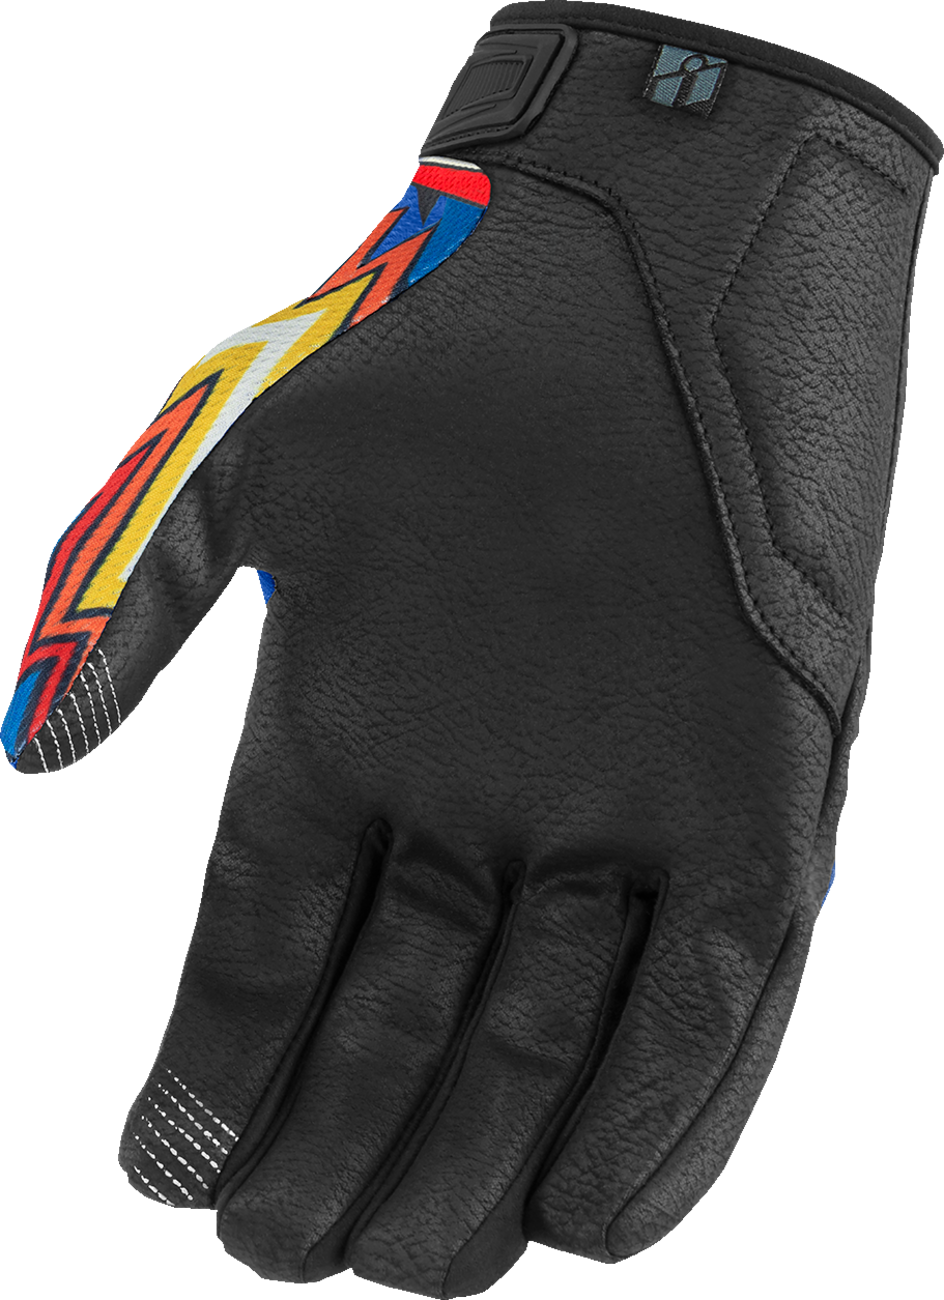 ICON Hooligan™ Flyboy CE Gloves - Blue - Small 3301-4709